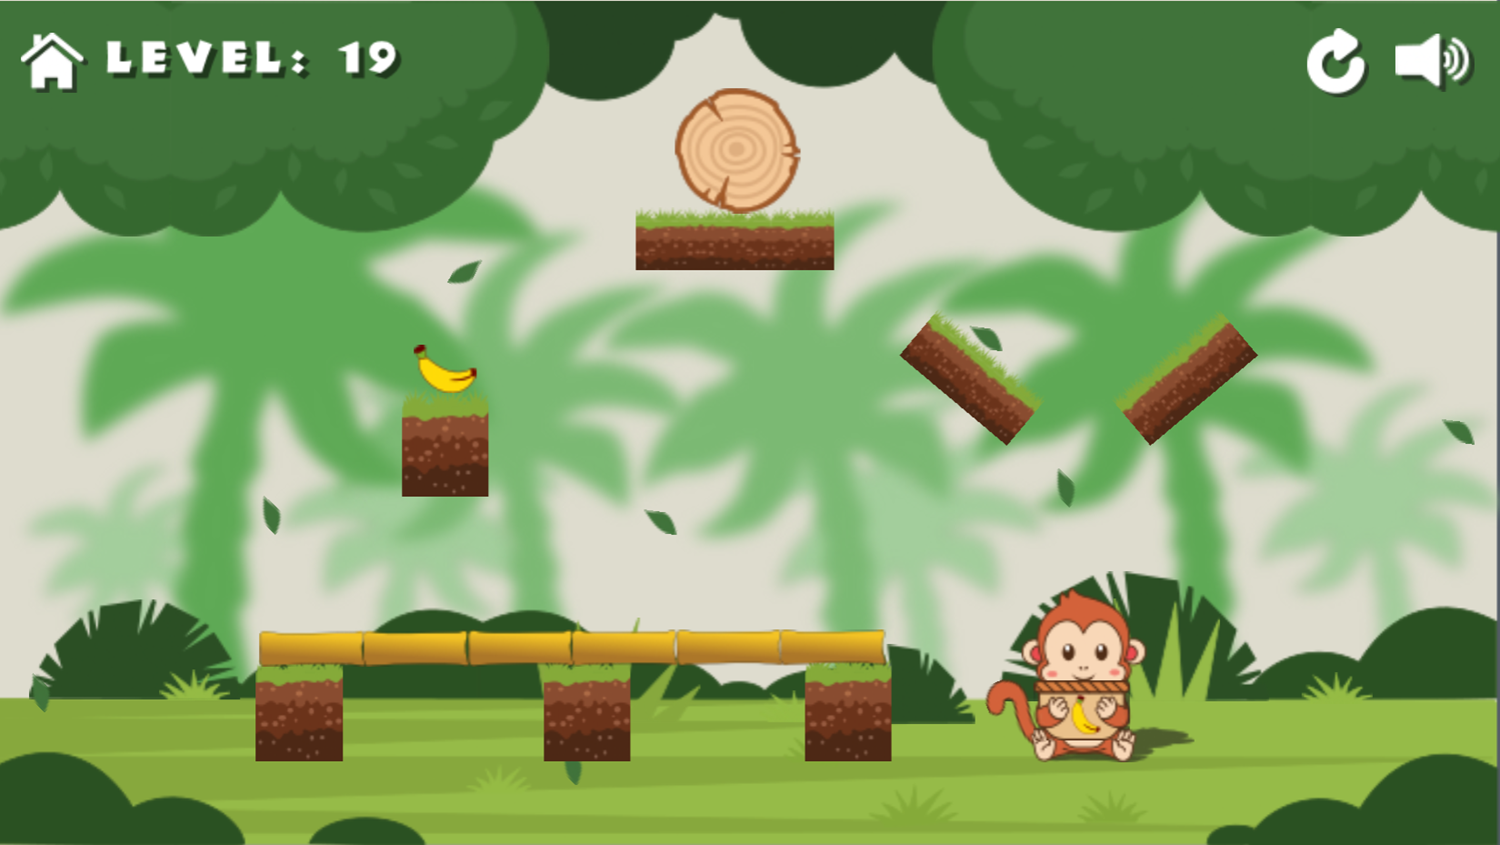 Monkeys and Fruits Game Level With a Lever Screenshot.